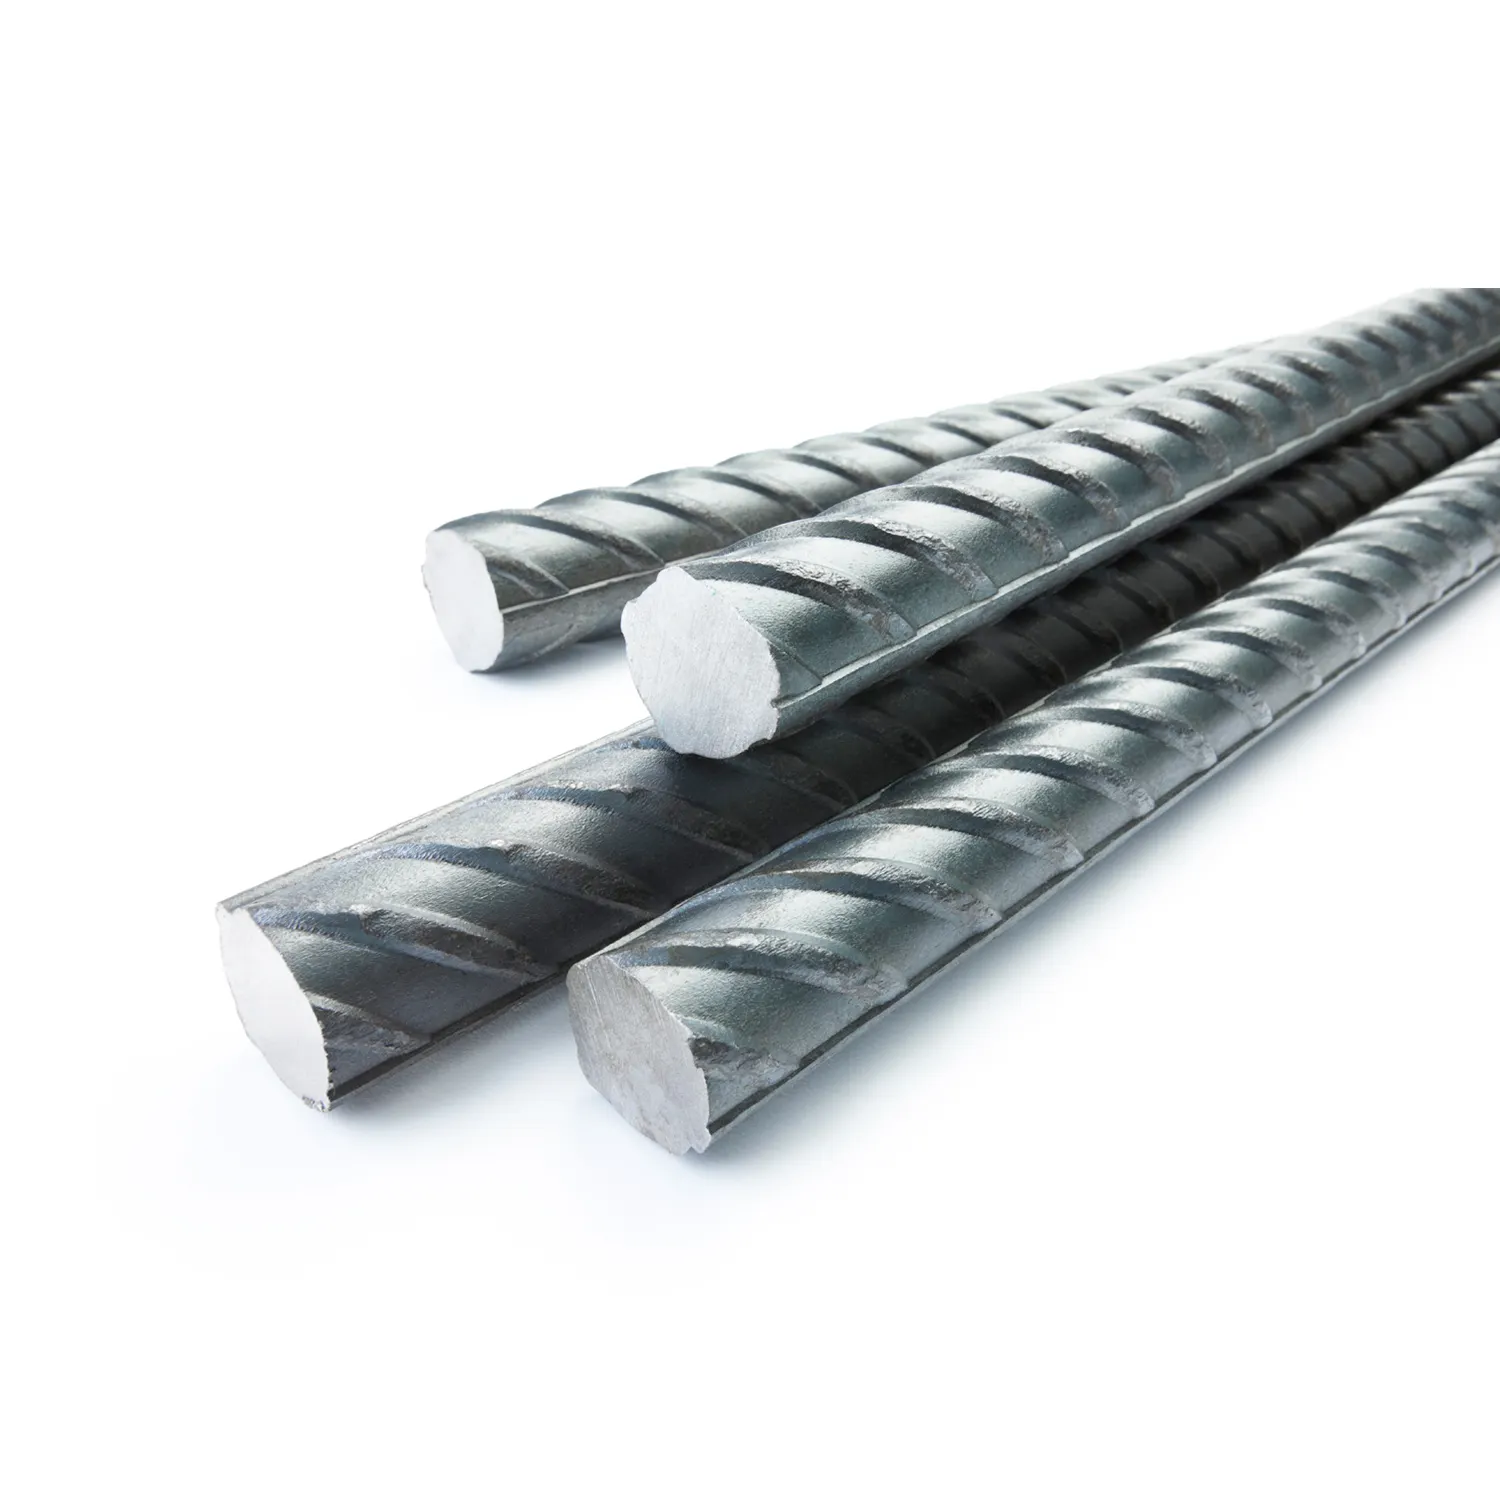 High Quality HRB400 Construction Concrete 12mm Reinforced Deformed Steel Rebar Price Per Ton For Construction